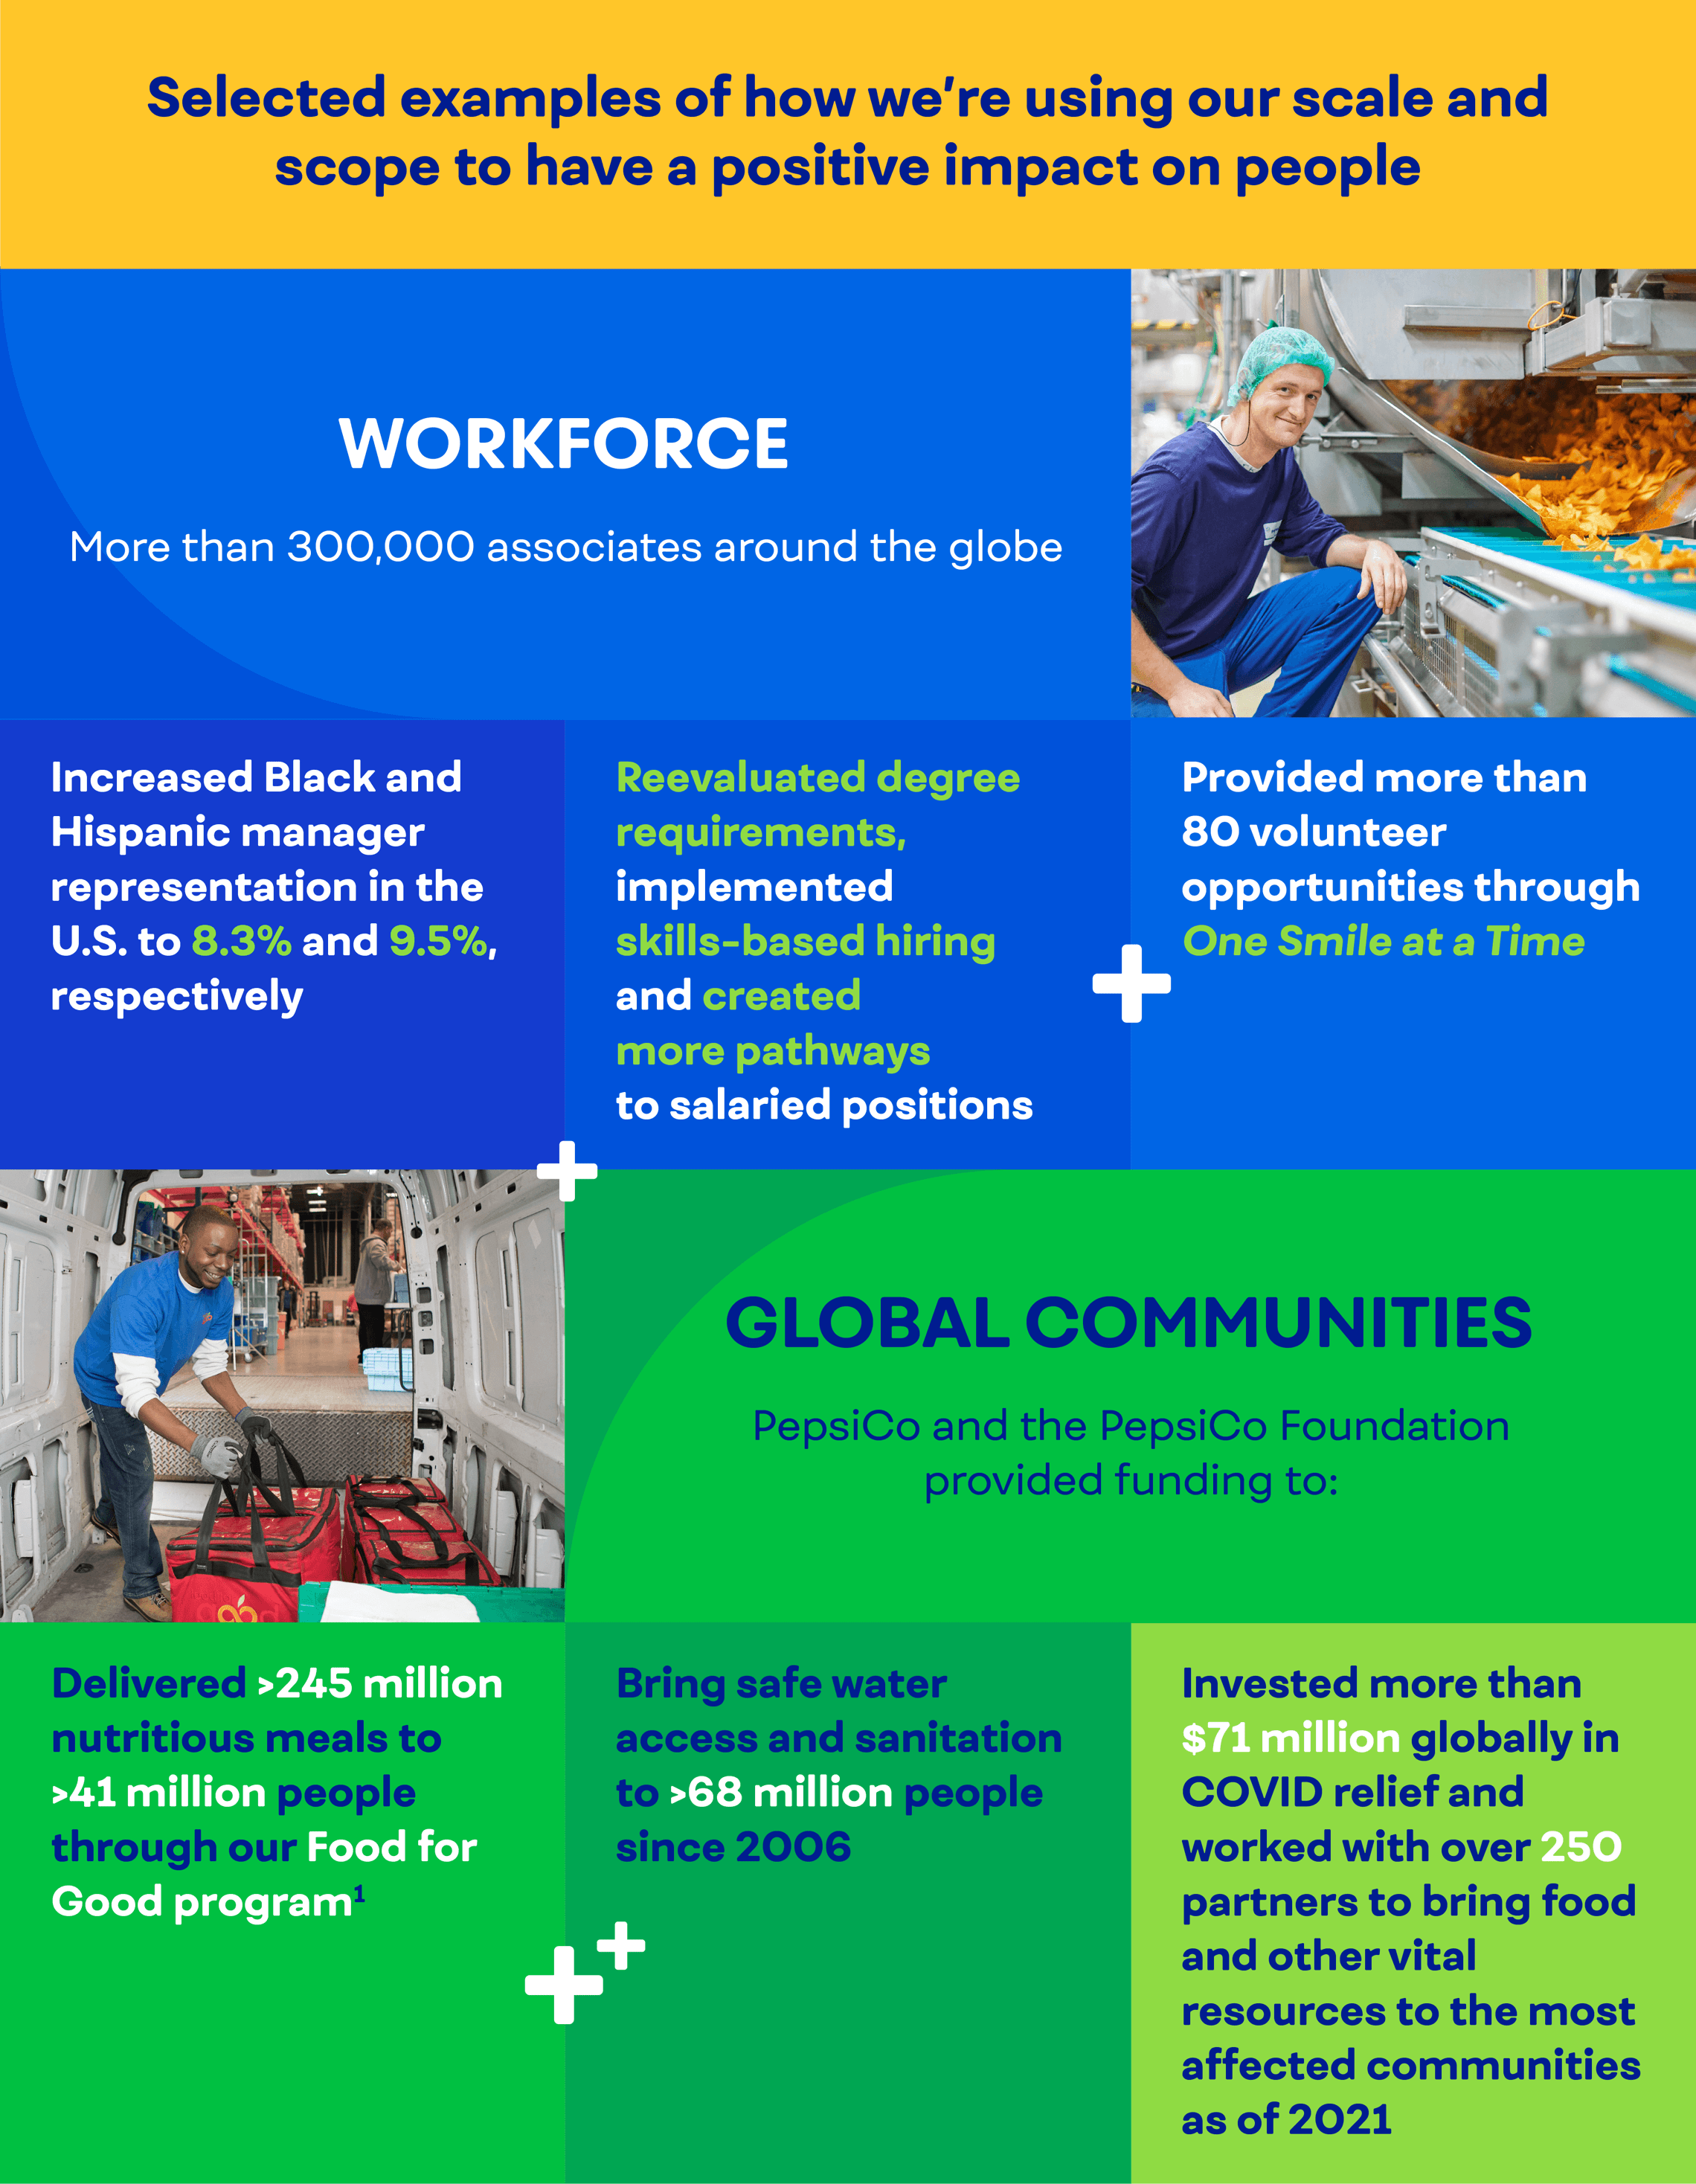 Selected examples of how we’re using our scale and scope to have a positive impact on people. More than 300,000,000 associates around the globe. PepsiCo and the PepsiCo Foundation provided funding.